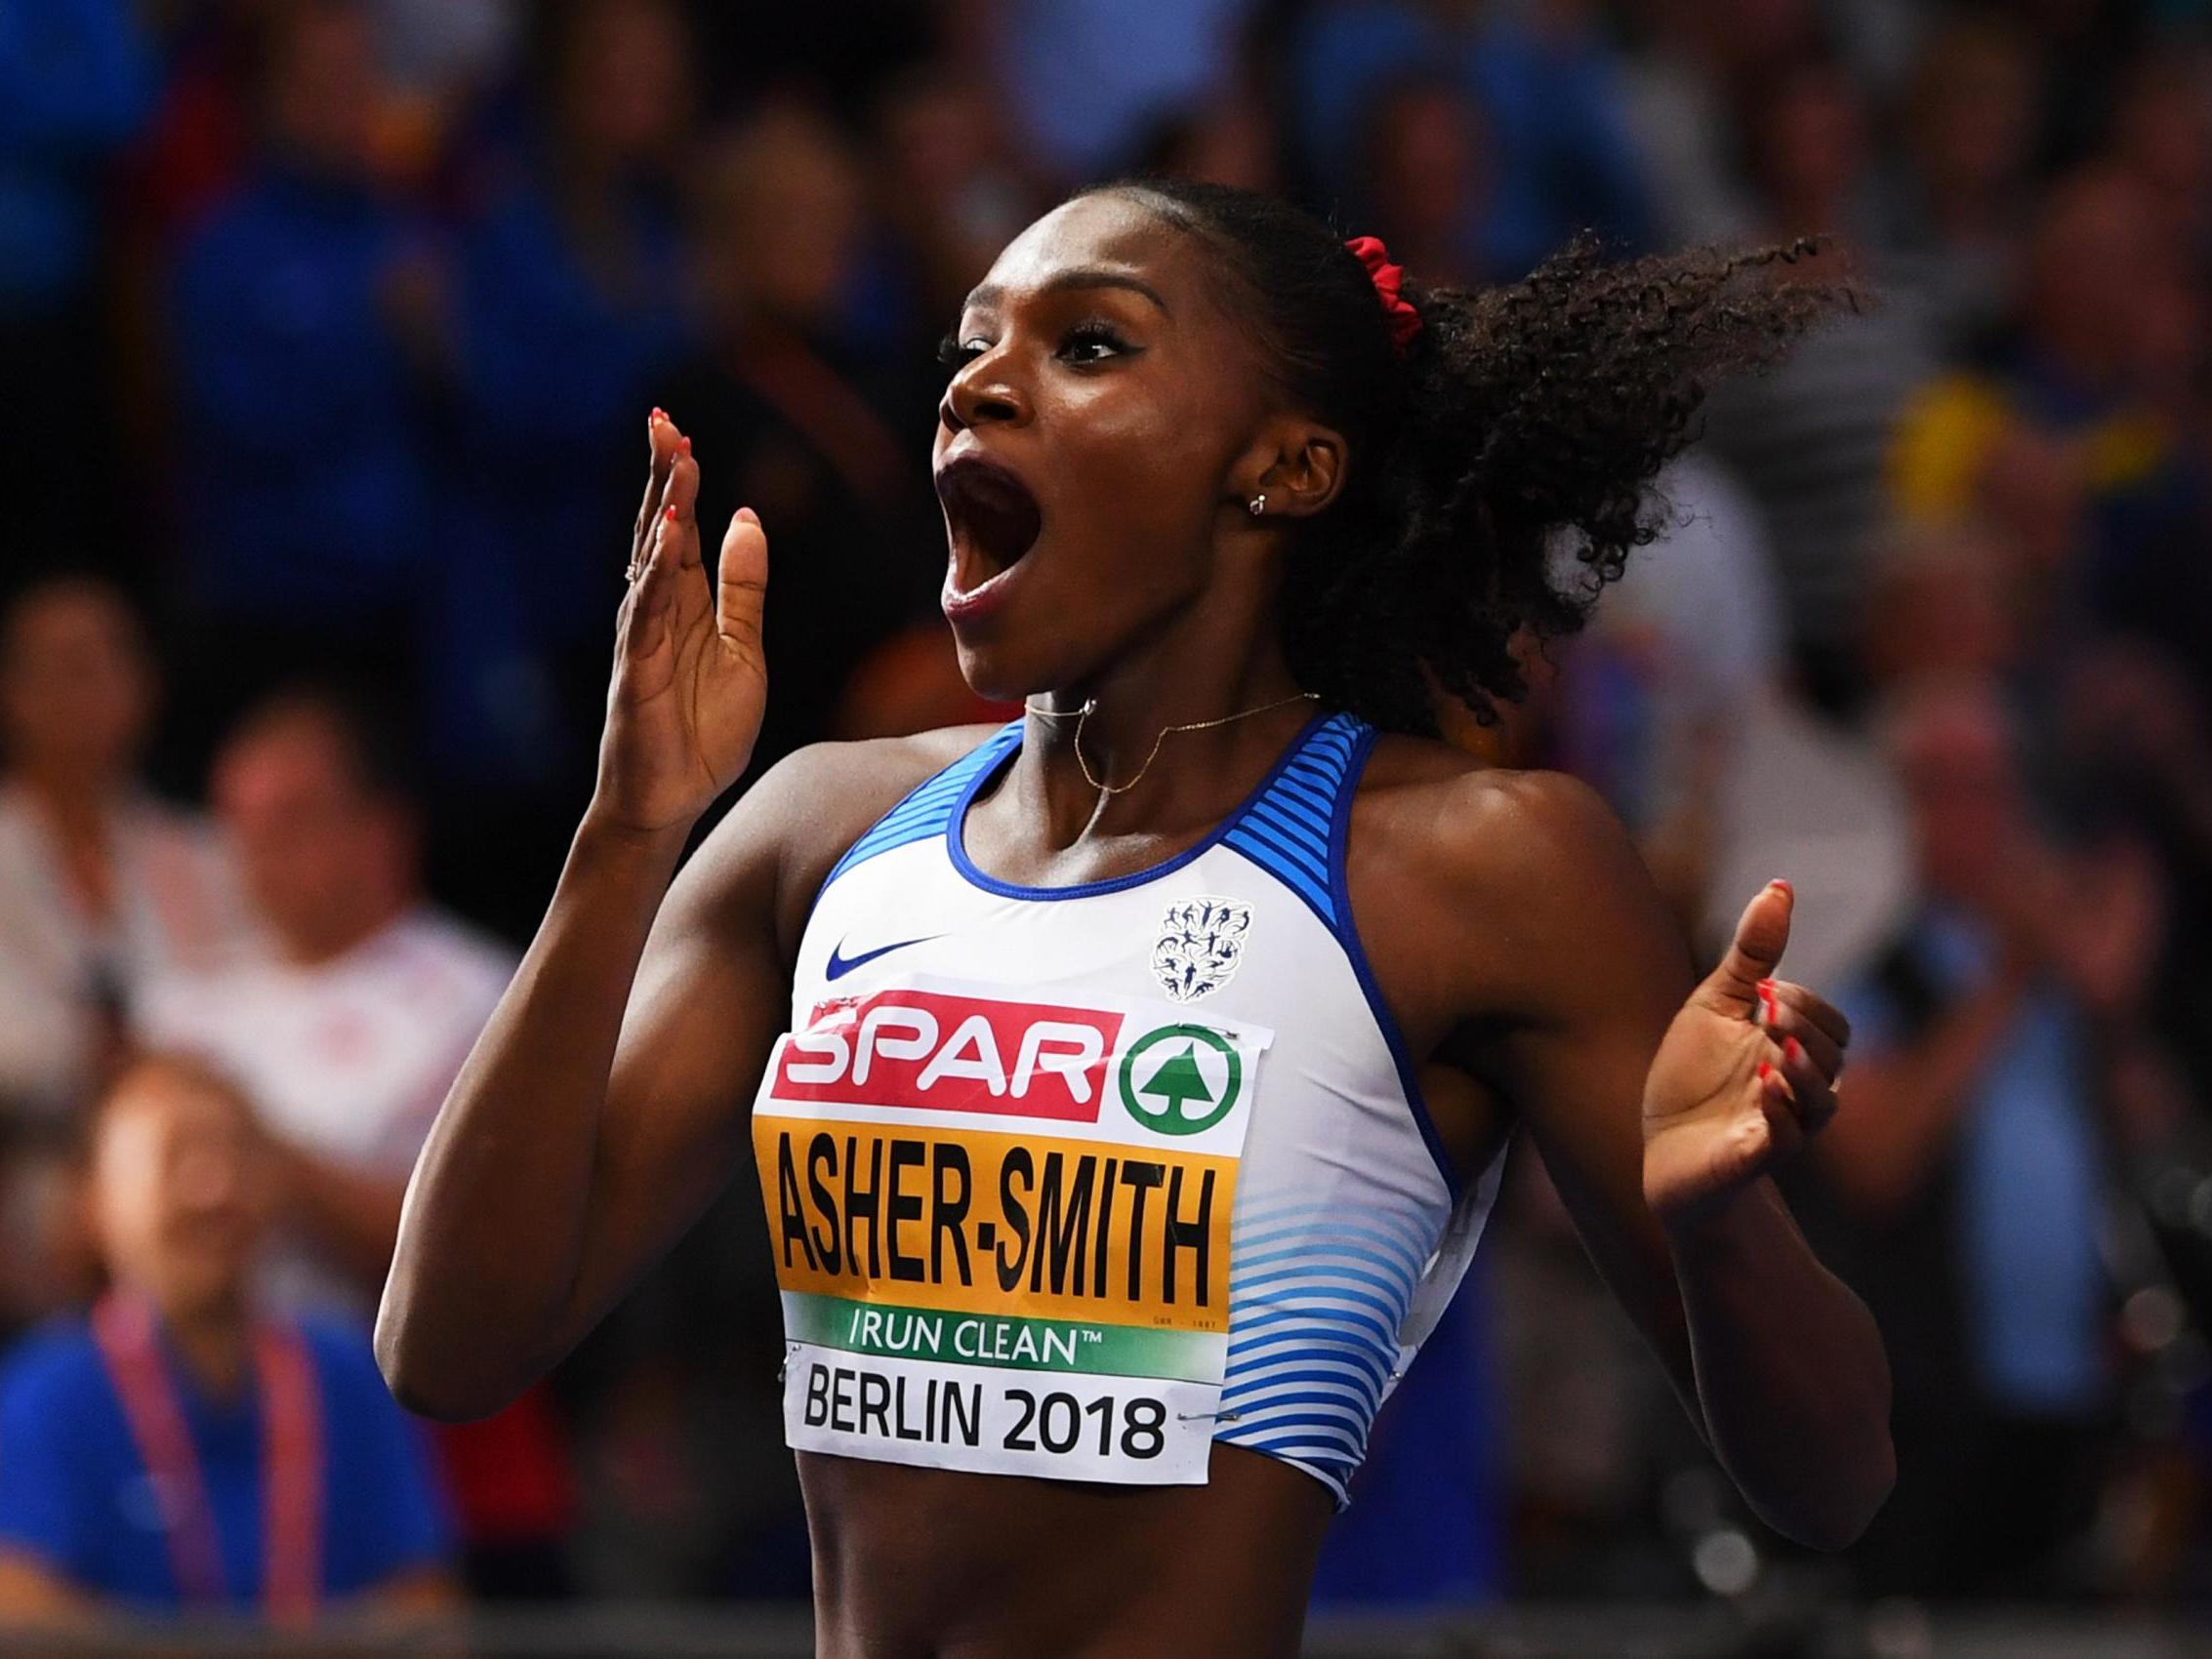 Will Dina Asher-Smith be able to build upon her remarkable 2018?